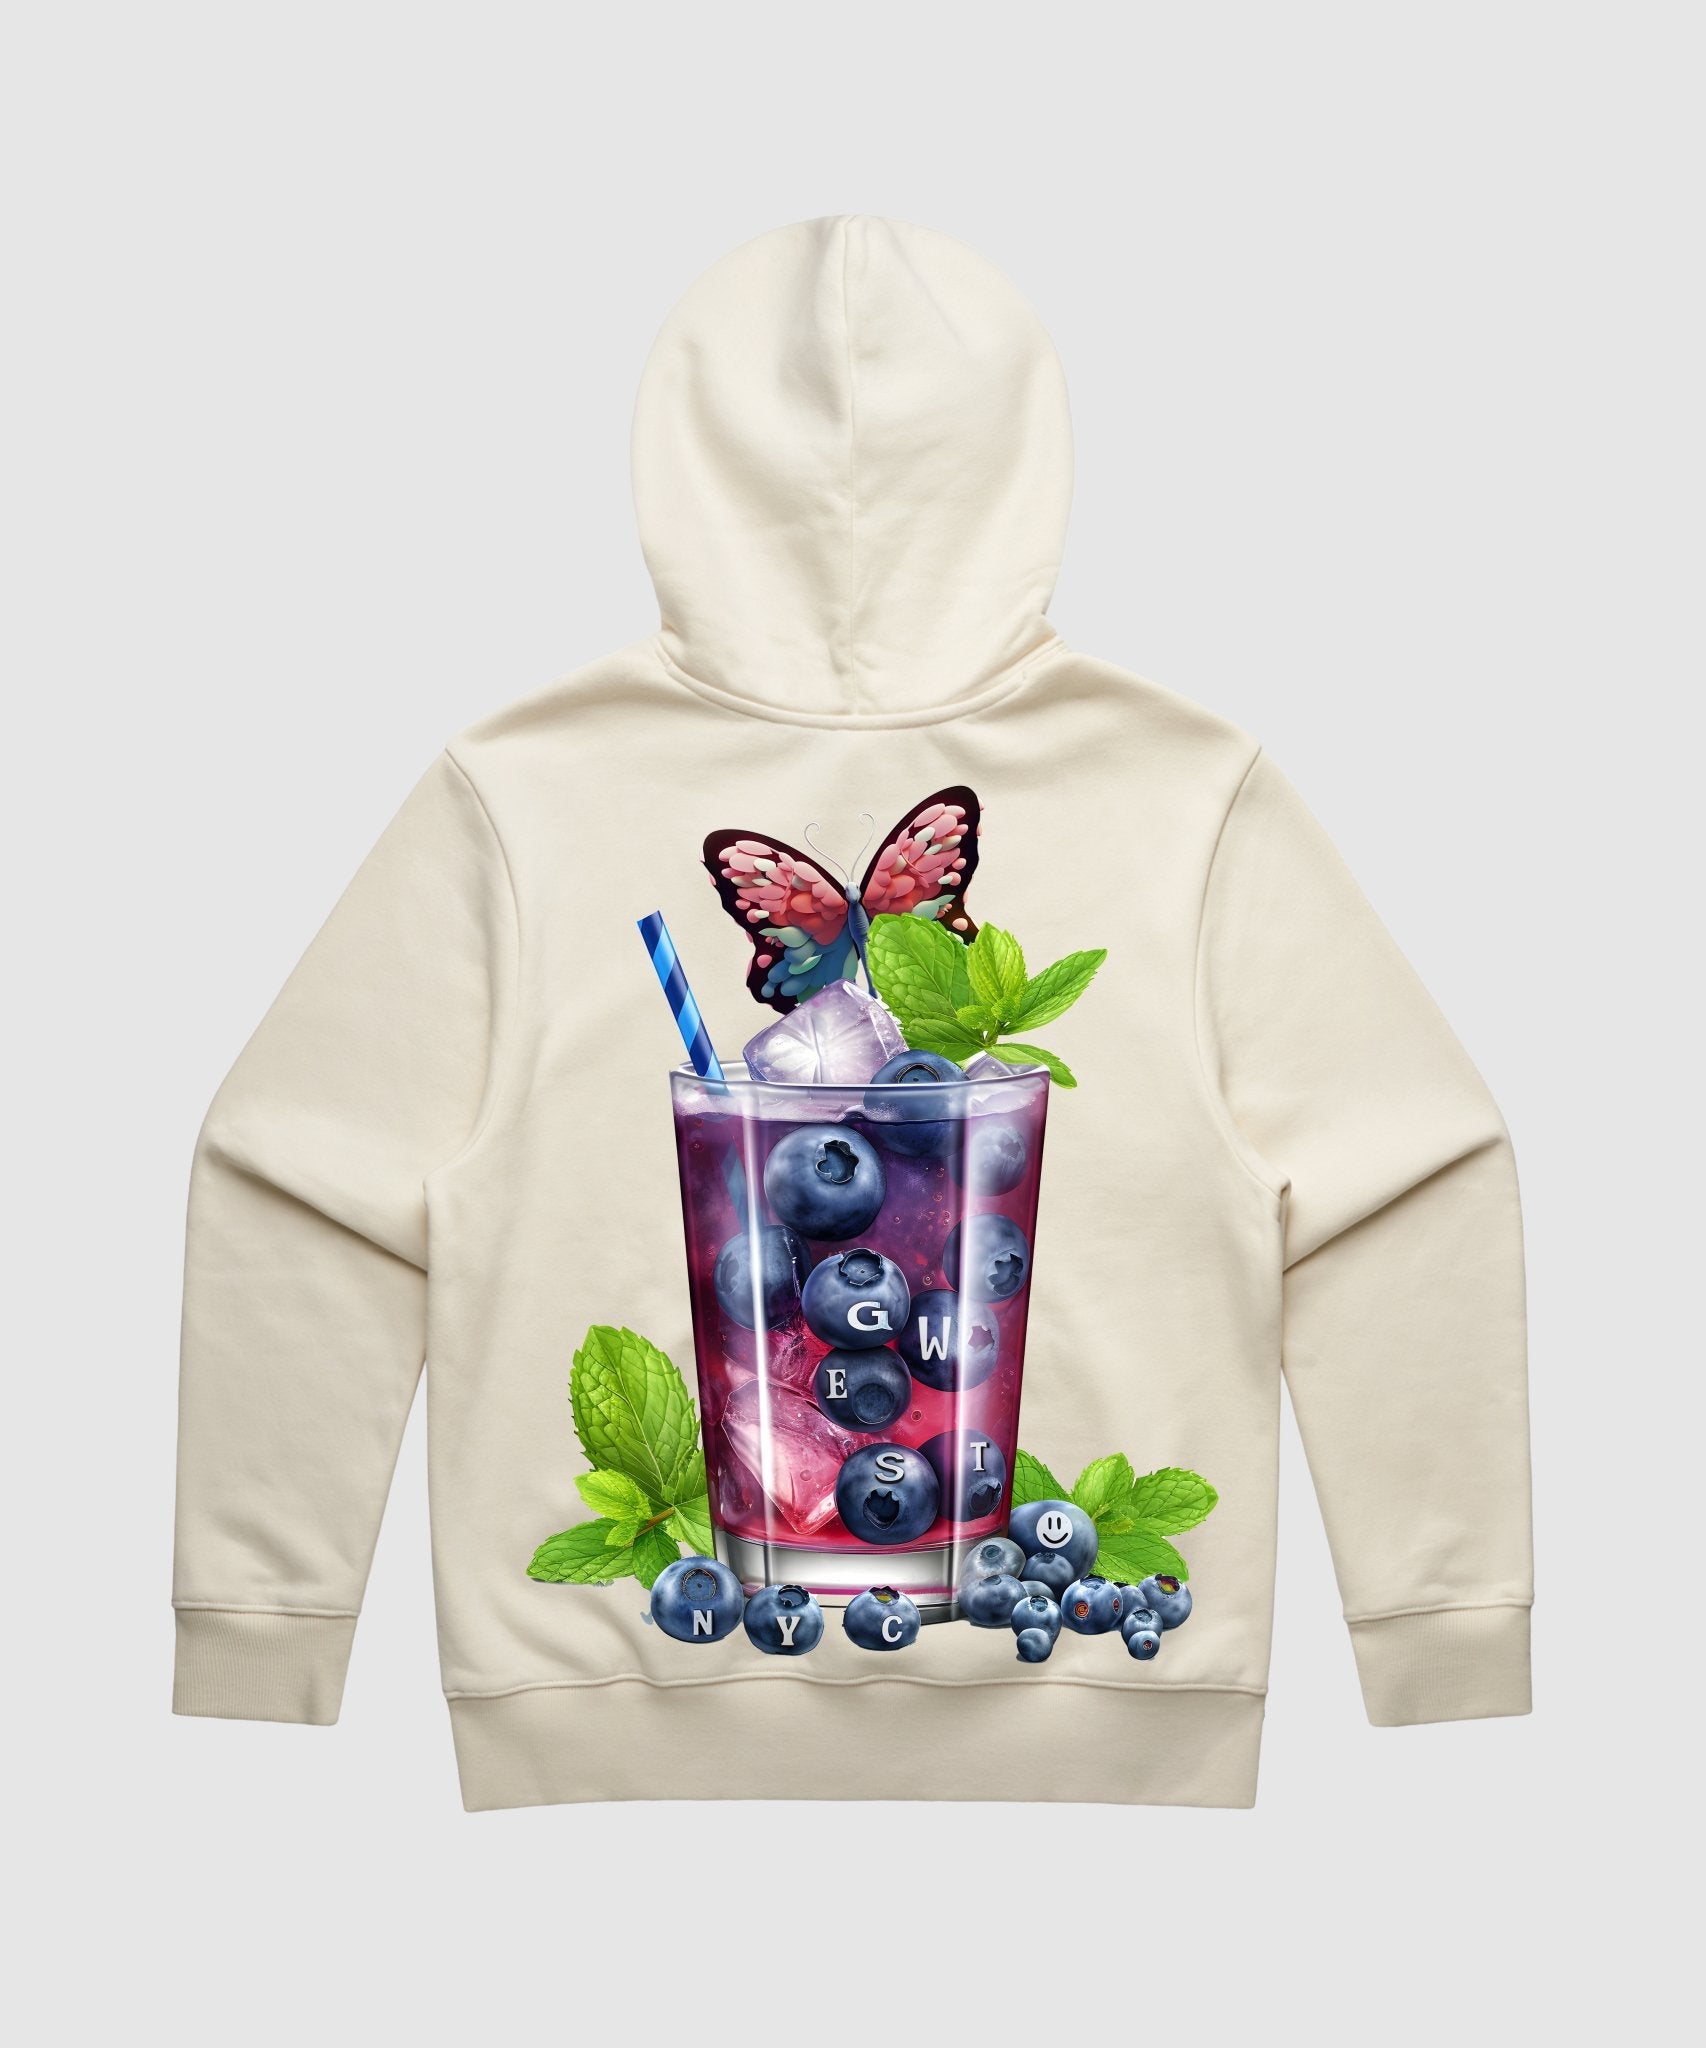 G WEST BLUEBERRY MOHITO HEAVY PREMIUM HOODIE - G West